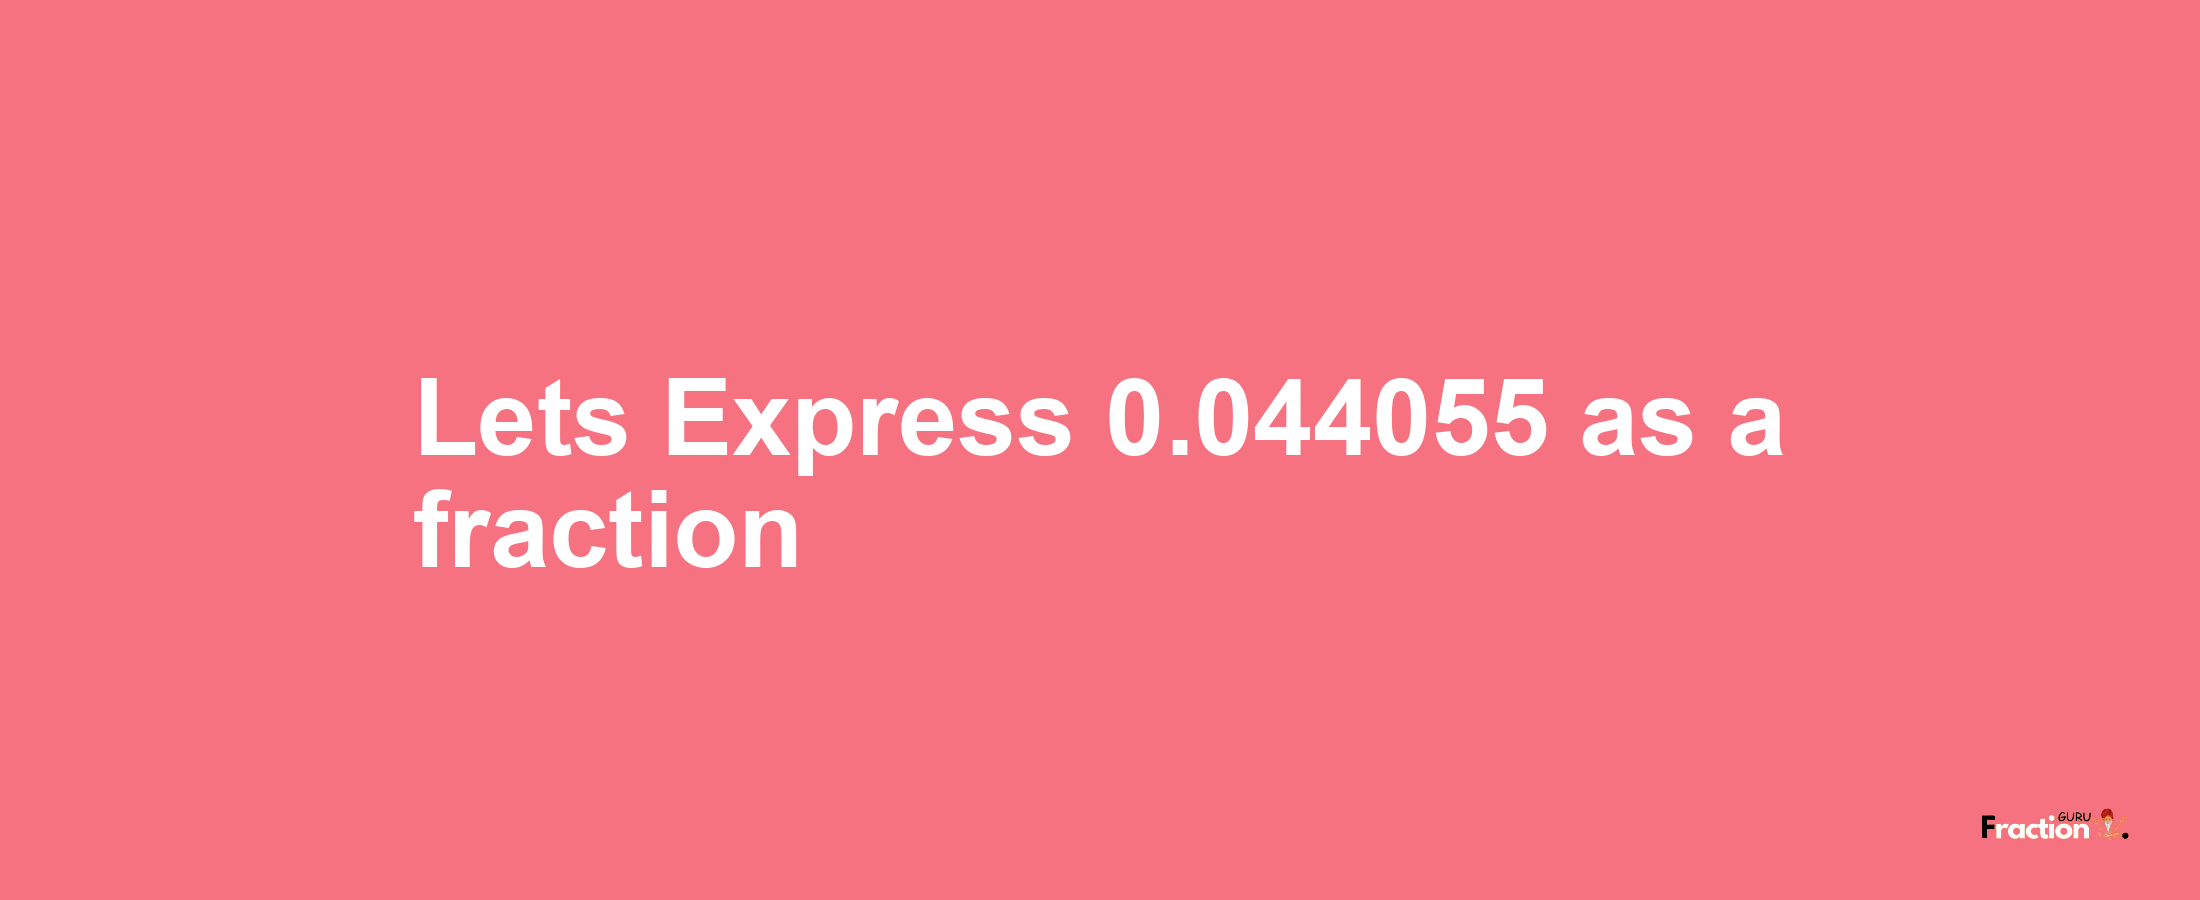 Lets Express 0.044055 as afraction